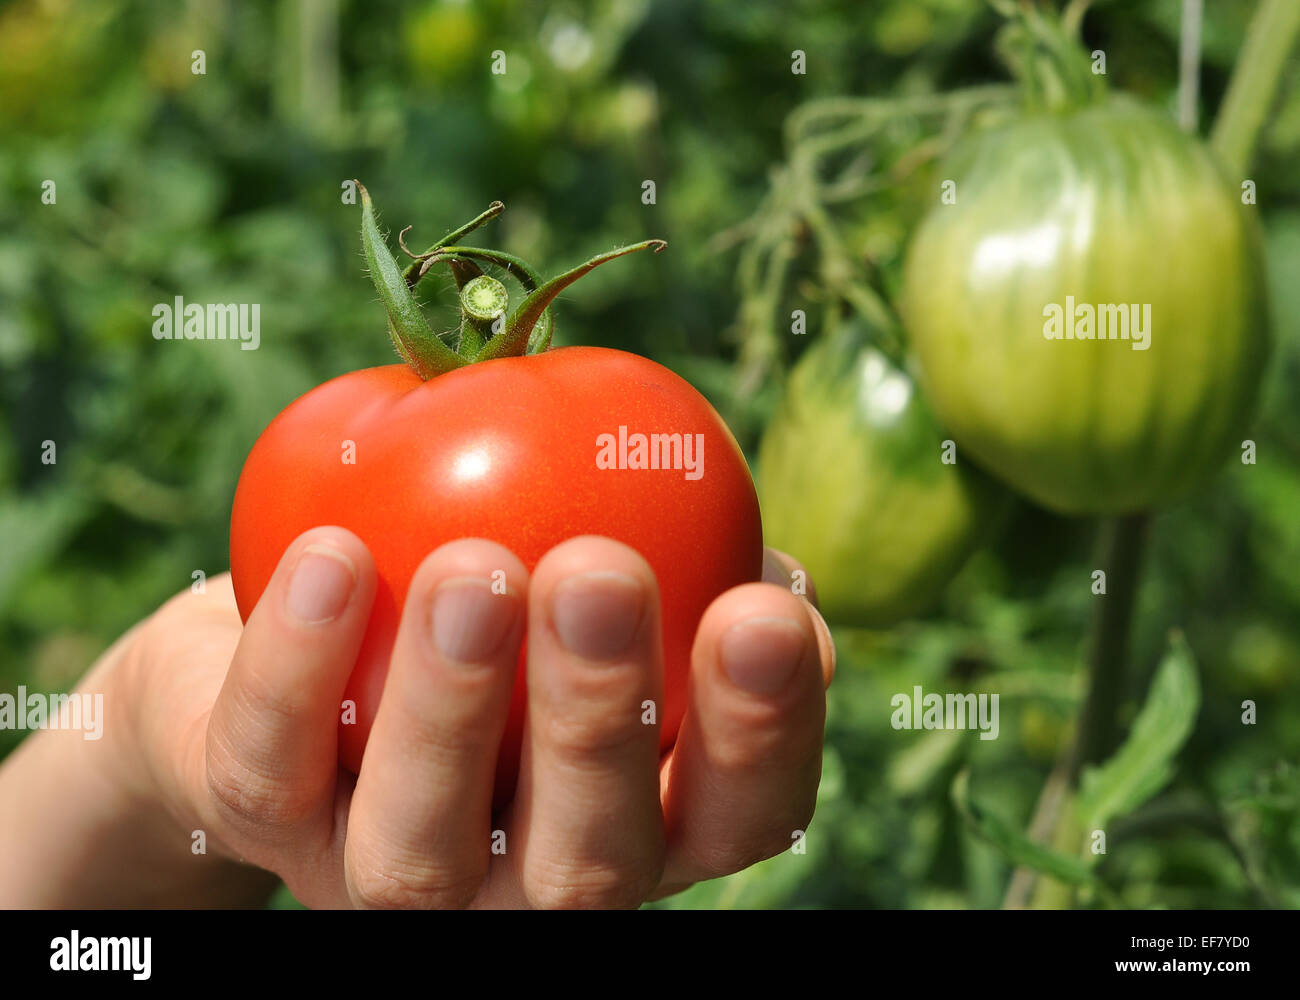 women's arm giving red ripe tomato on the tips Stock Photo